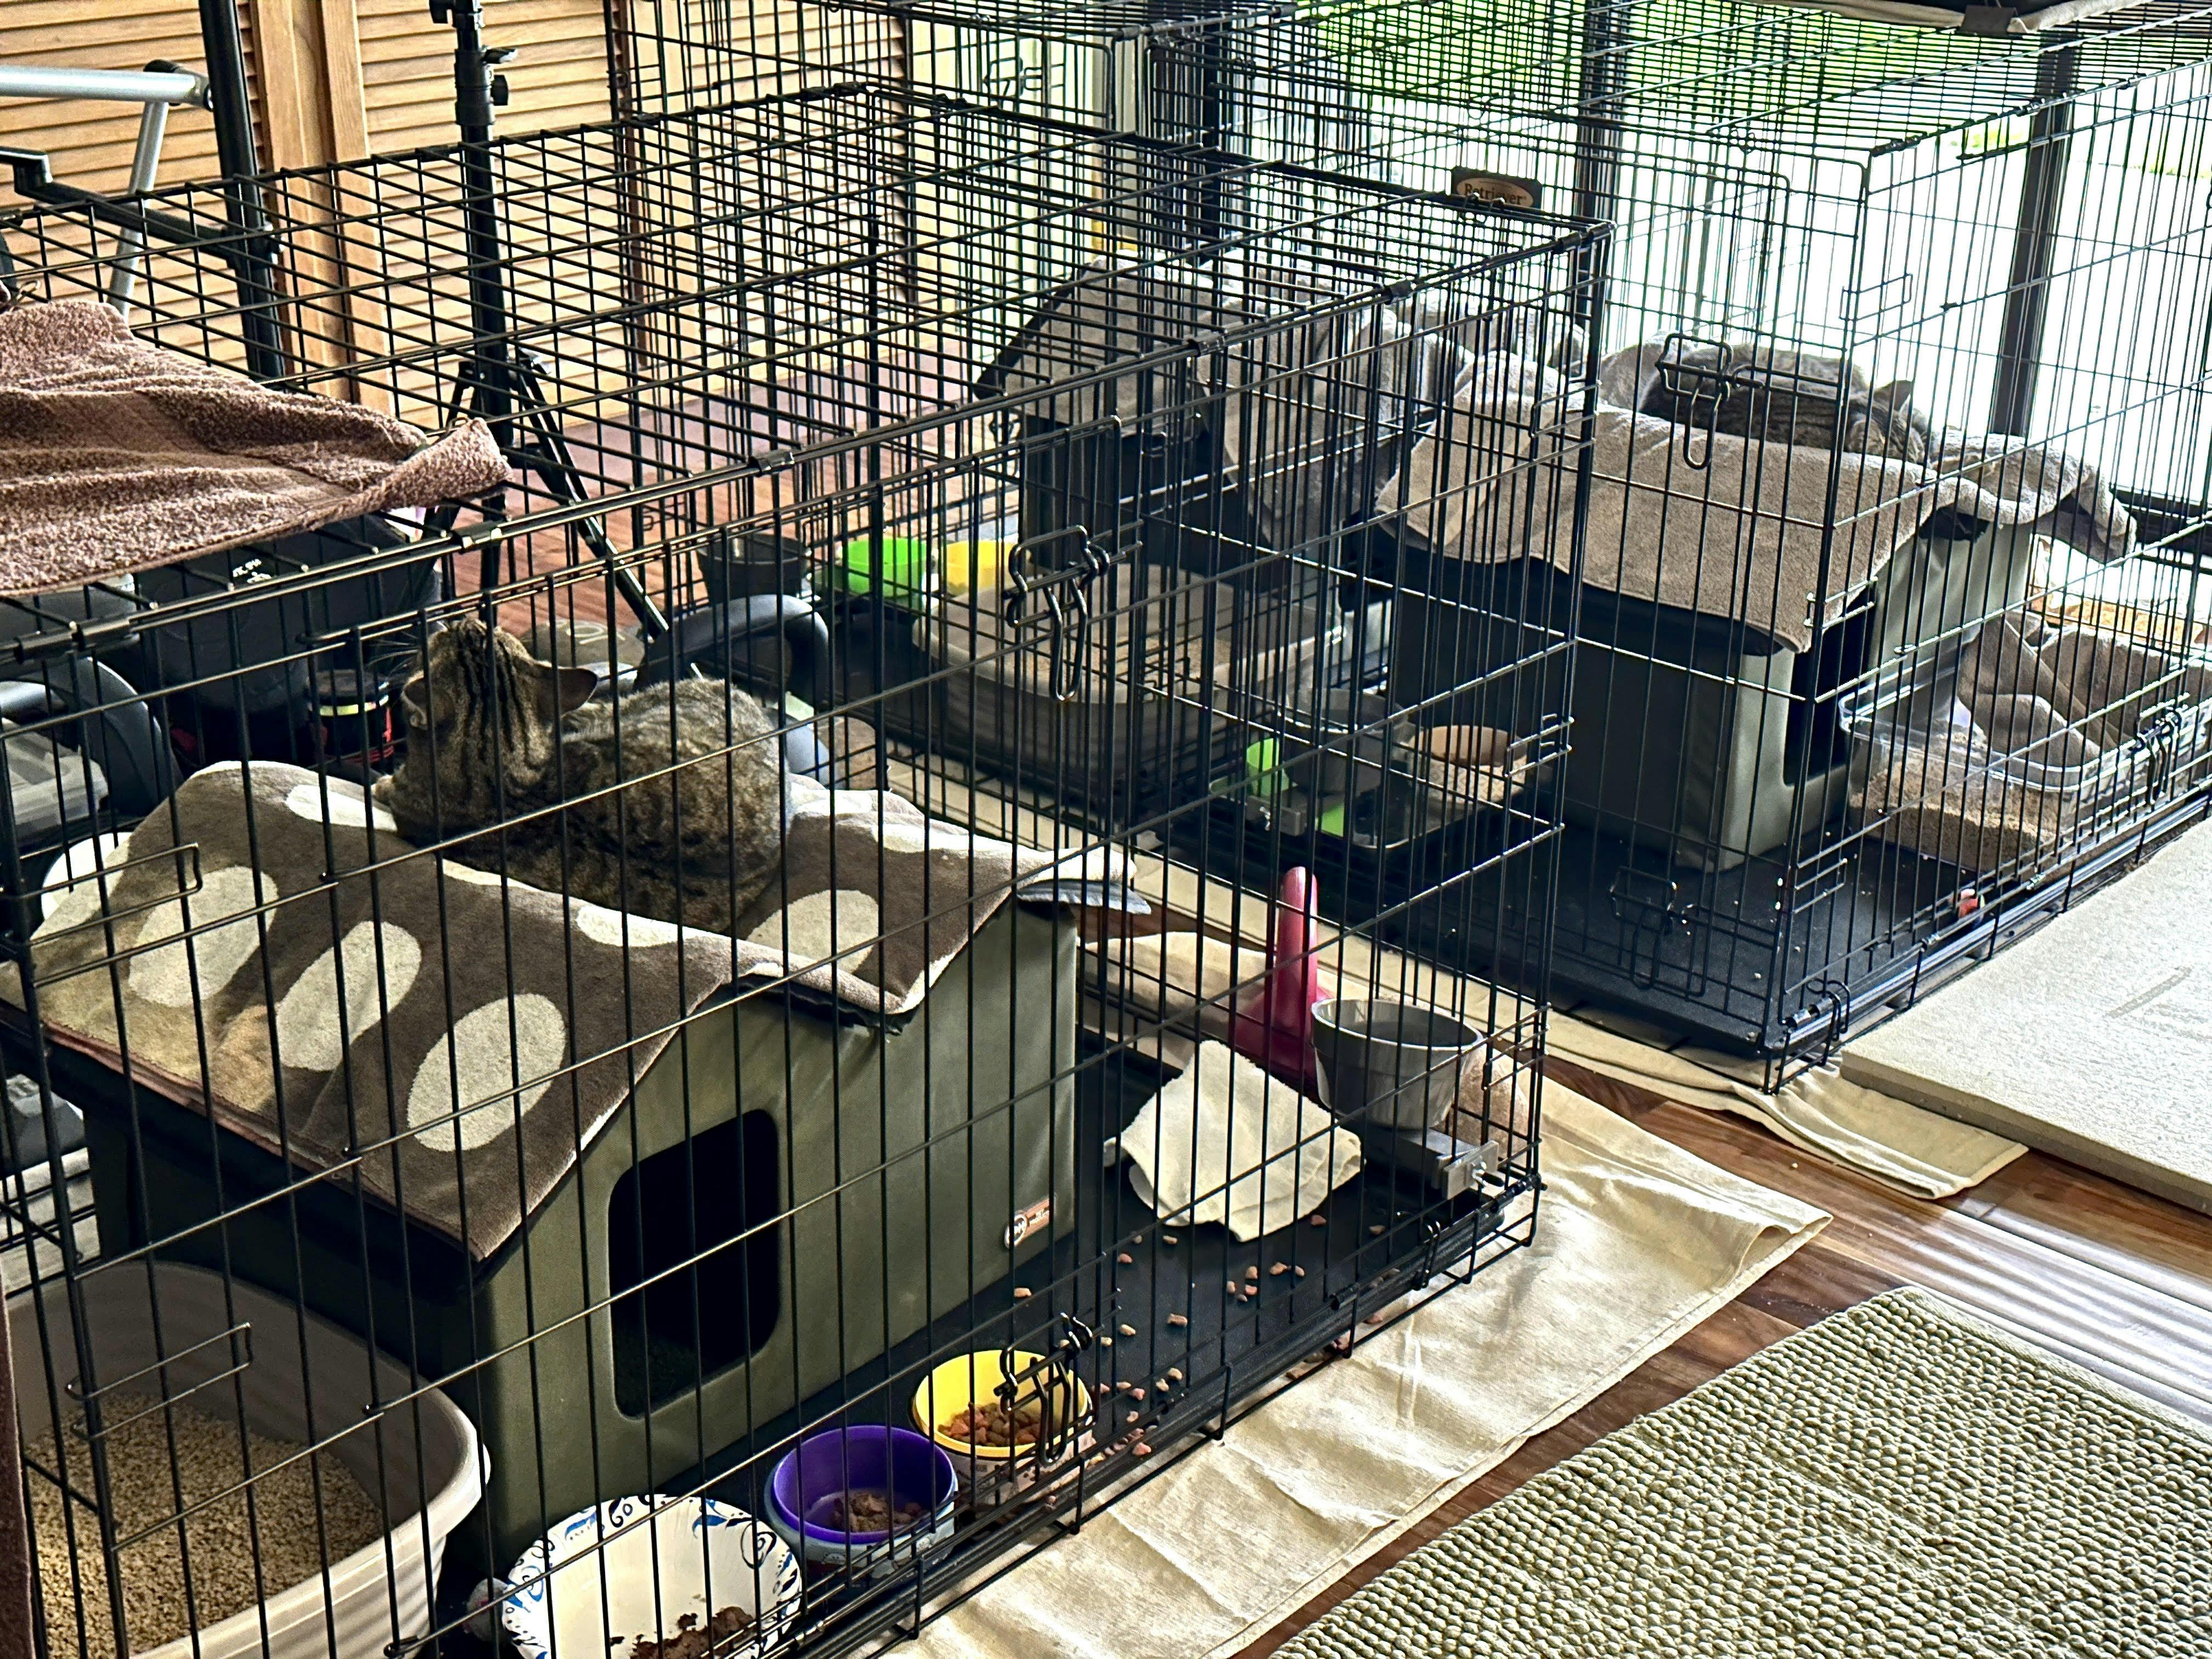 Photo of three large dog kennels, each with a gray tabby kitty.